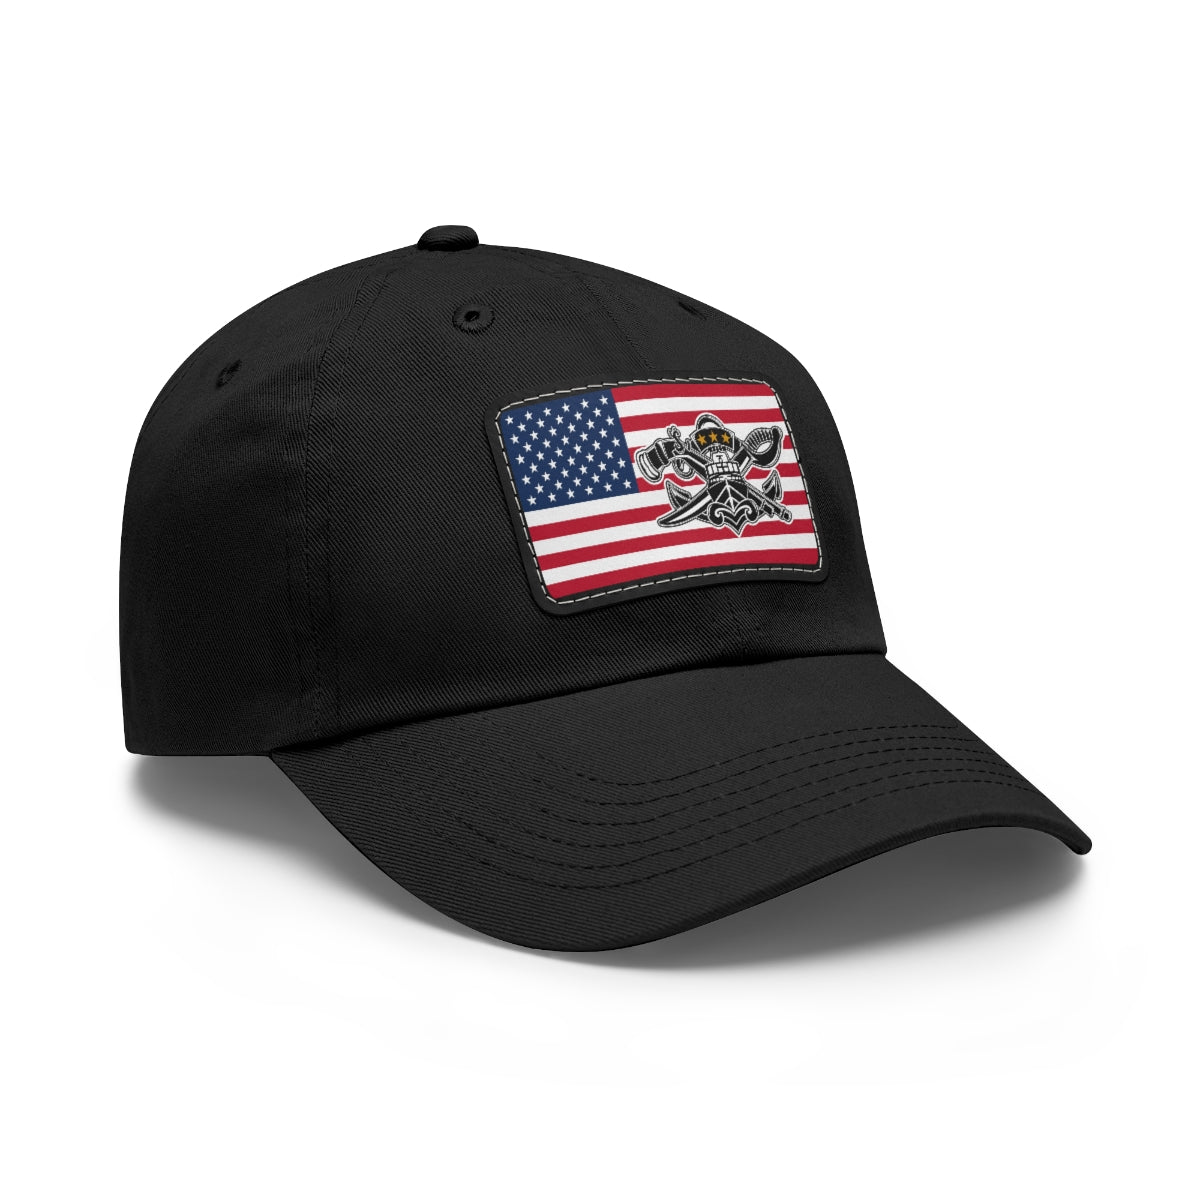 USA with SWCC Pin Hat with Leather Patch